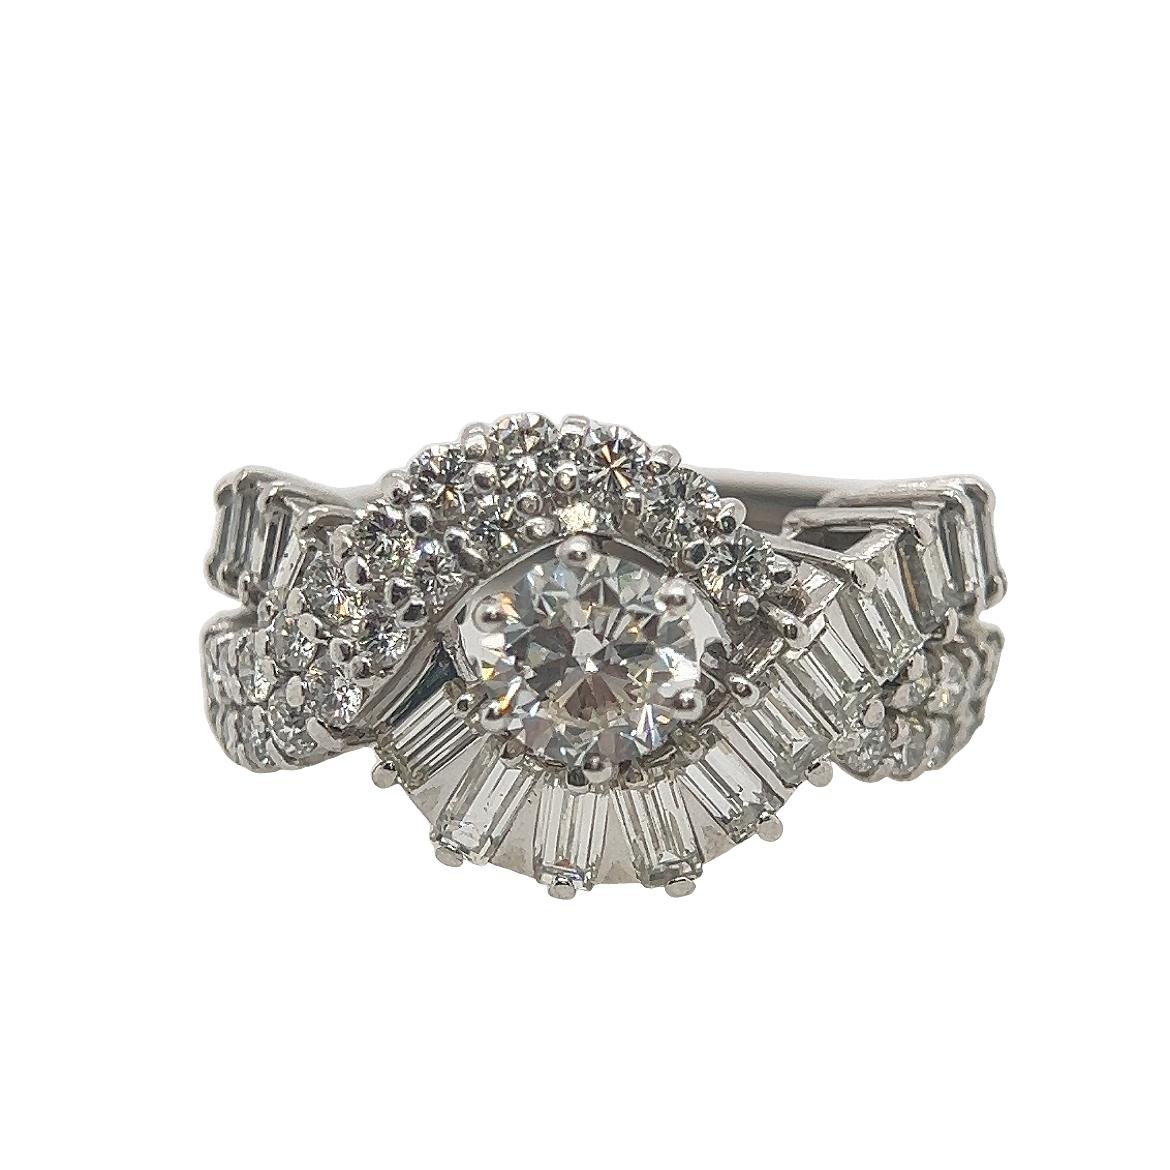 An exquisite mixed cut diamond cocktail ring. 

The central stone is approximately 1ct and is a brilliant cut diamond. 

Surrounding diamonds are approximately 1.5cts and are brilliant and baguette cut diamonds. 

Set in 18ct gold. 